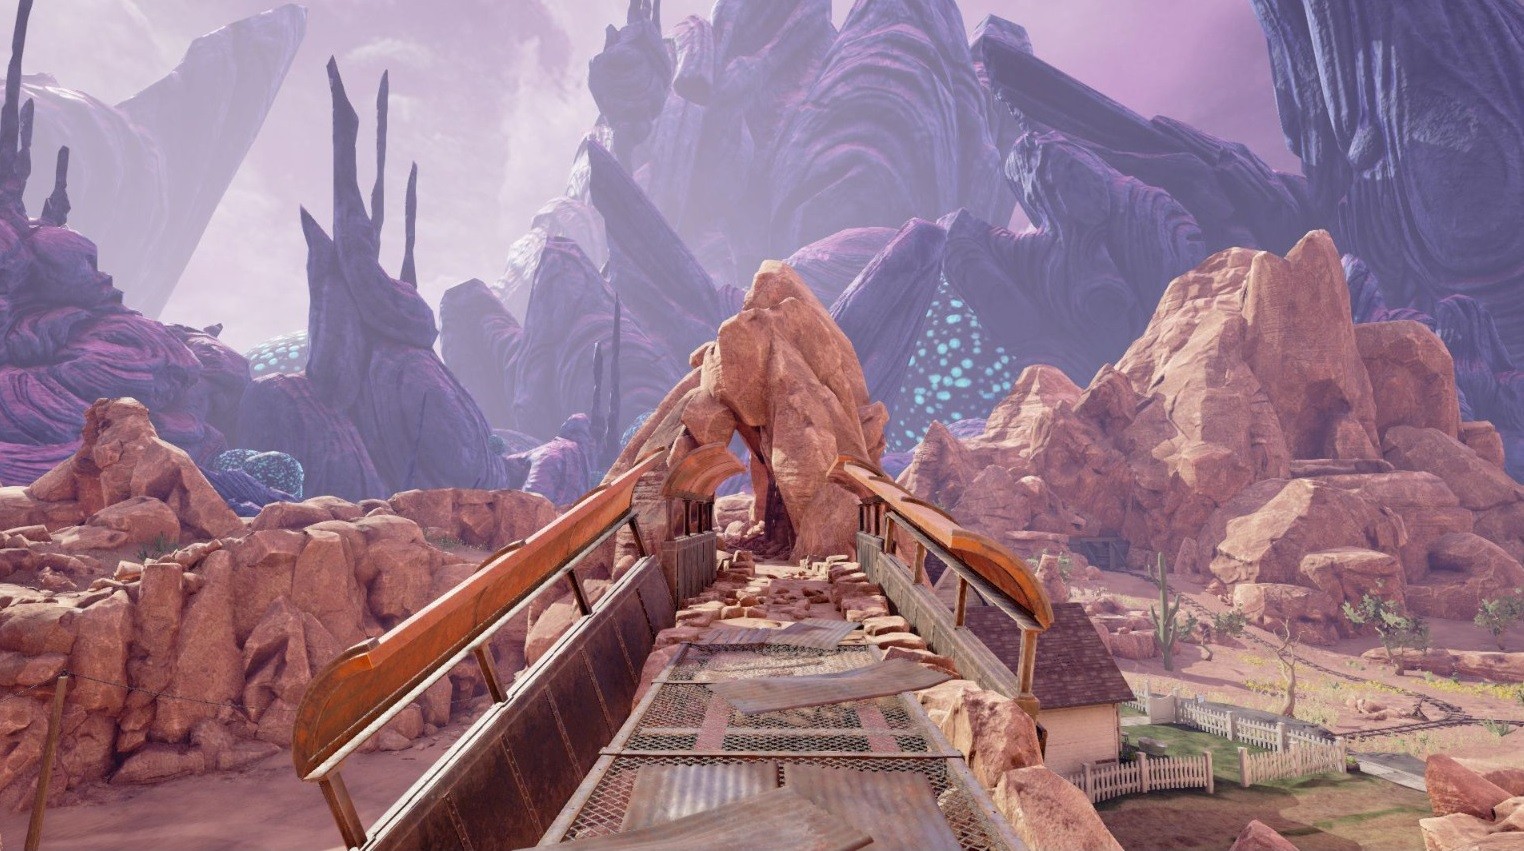 obduction game download